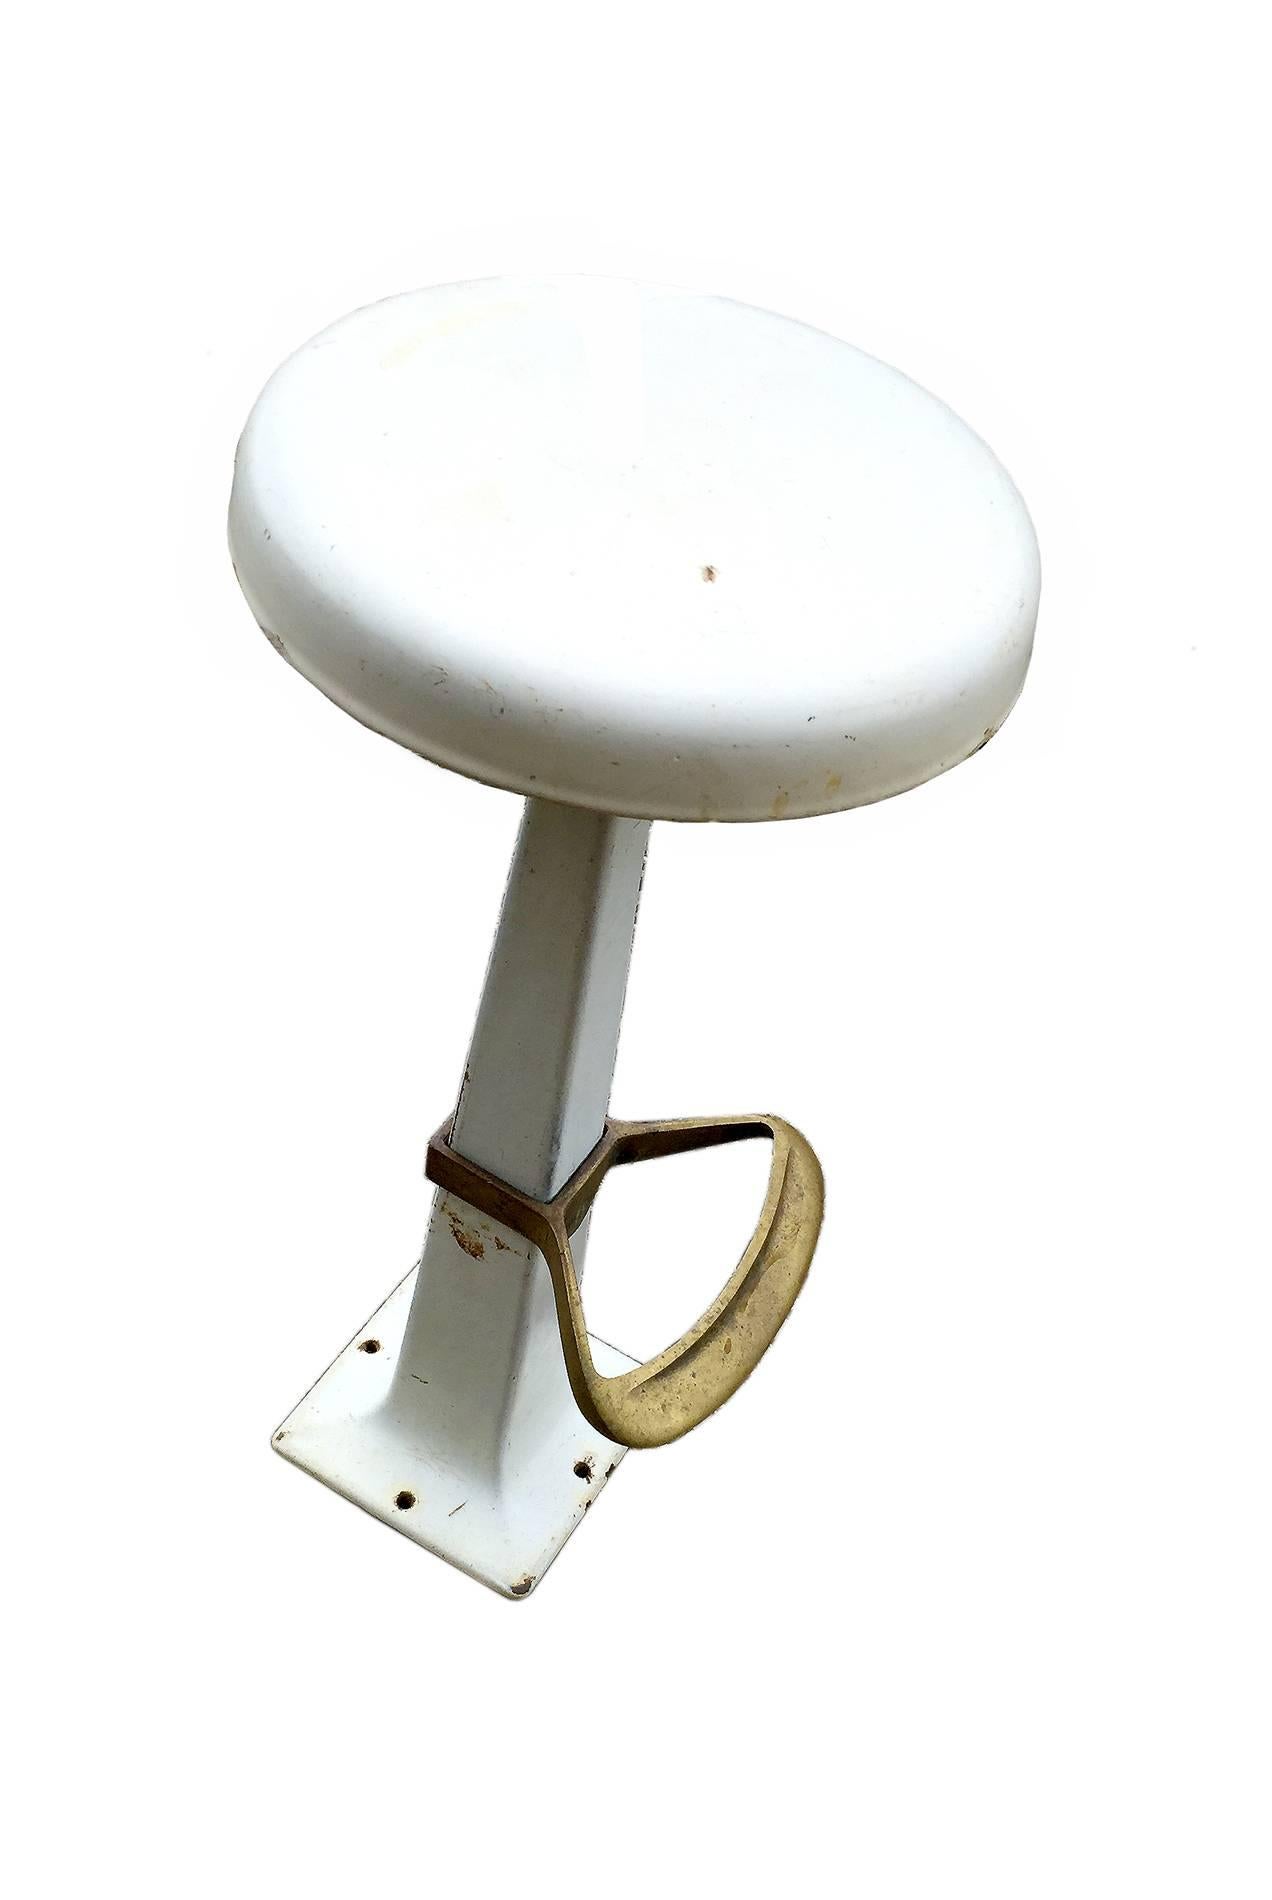 Set of four white enameled metal stools with footrest for the bistro industry. Sold
also separately, USA, circa 1930. The price is intended for all four pieces.

  